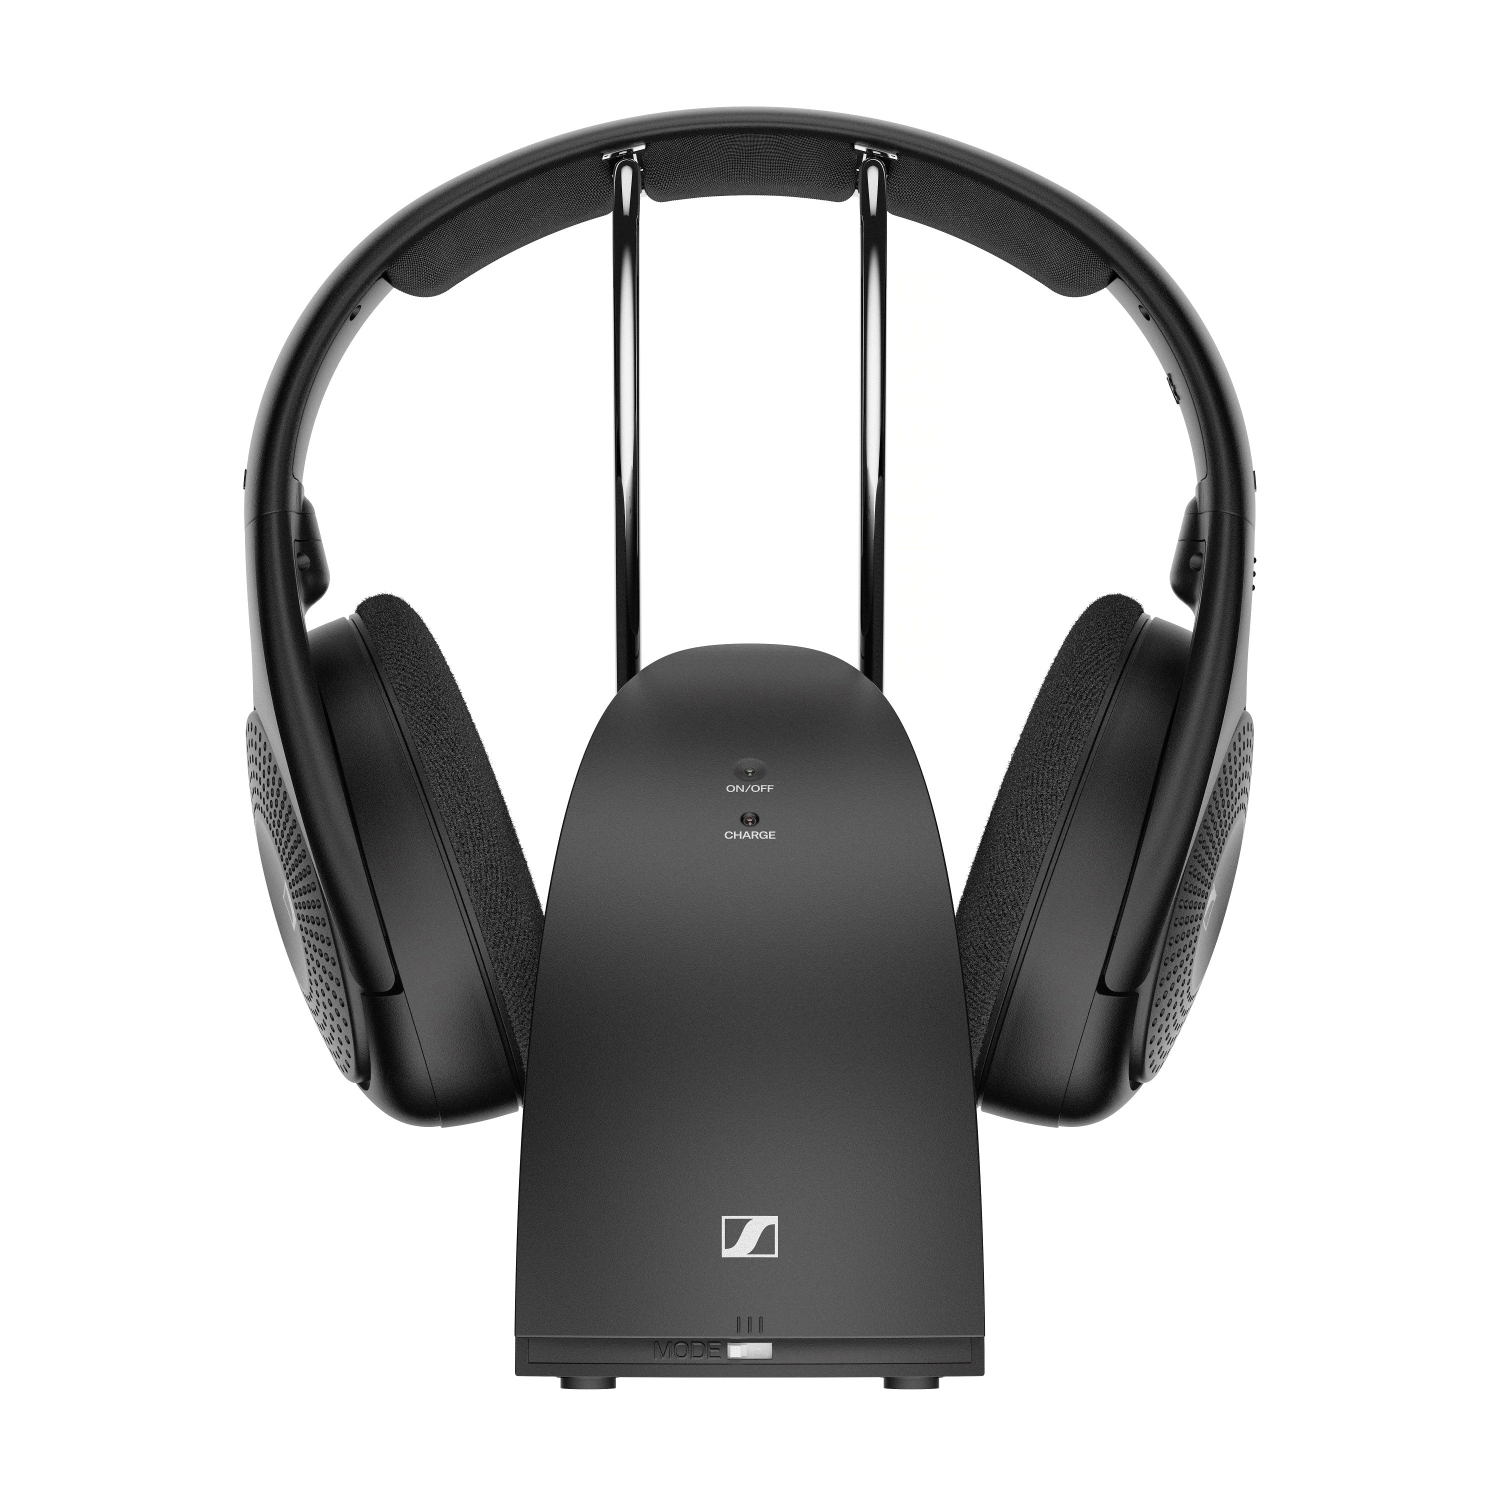 Sennheiser RS 120-W On-Ear Wireless Headphones for Crystal-Clear TV Listening with 3 Sound Modes, Lightweight Design, Easy Volume Control - Certified Refurbished